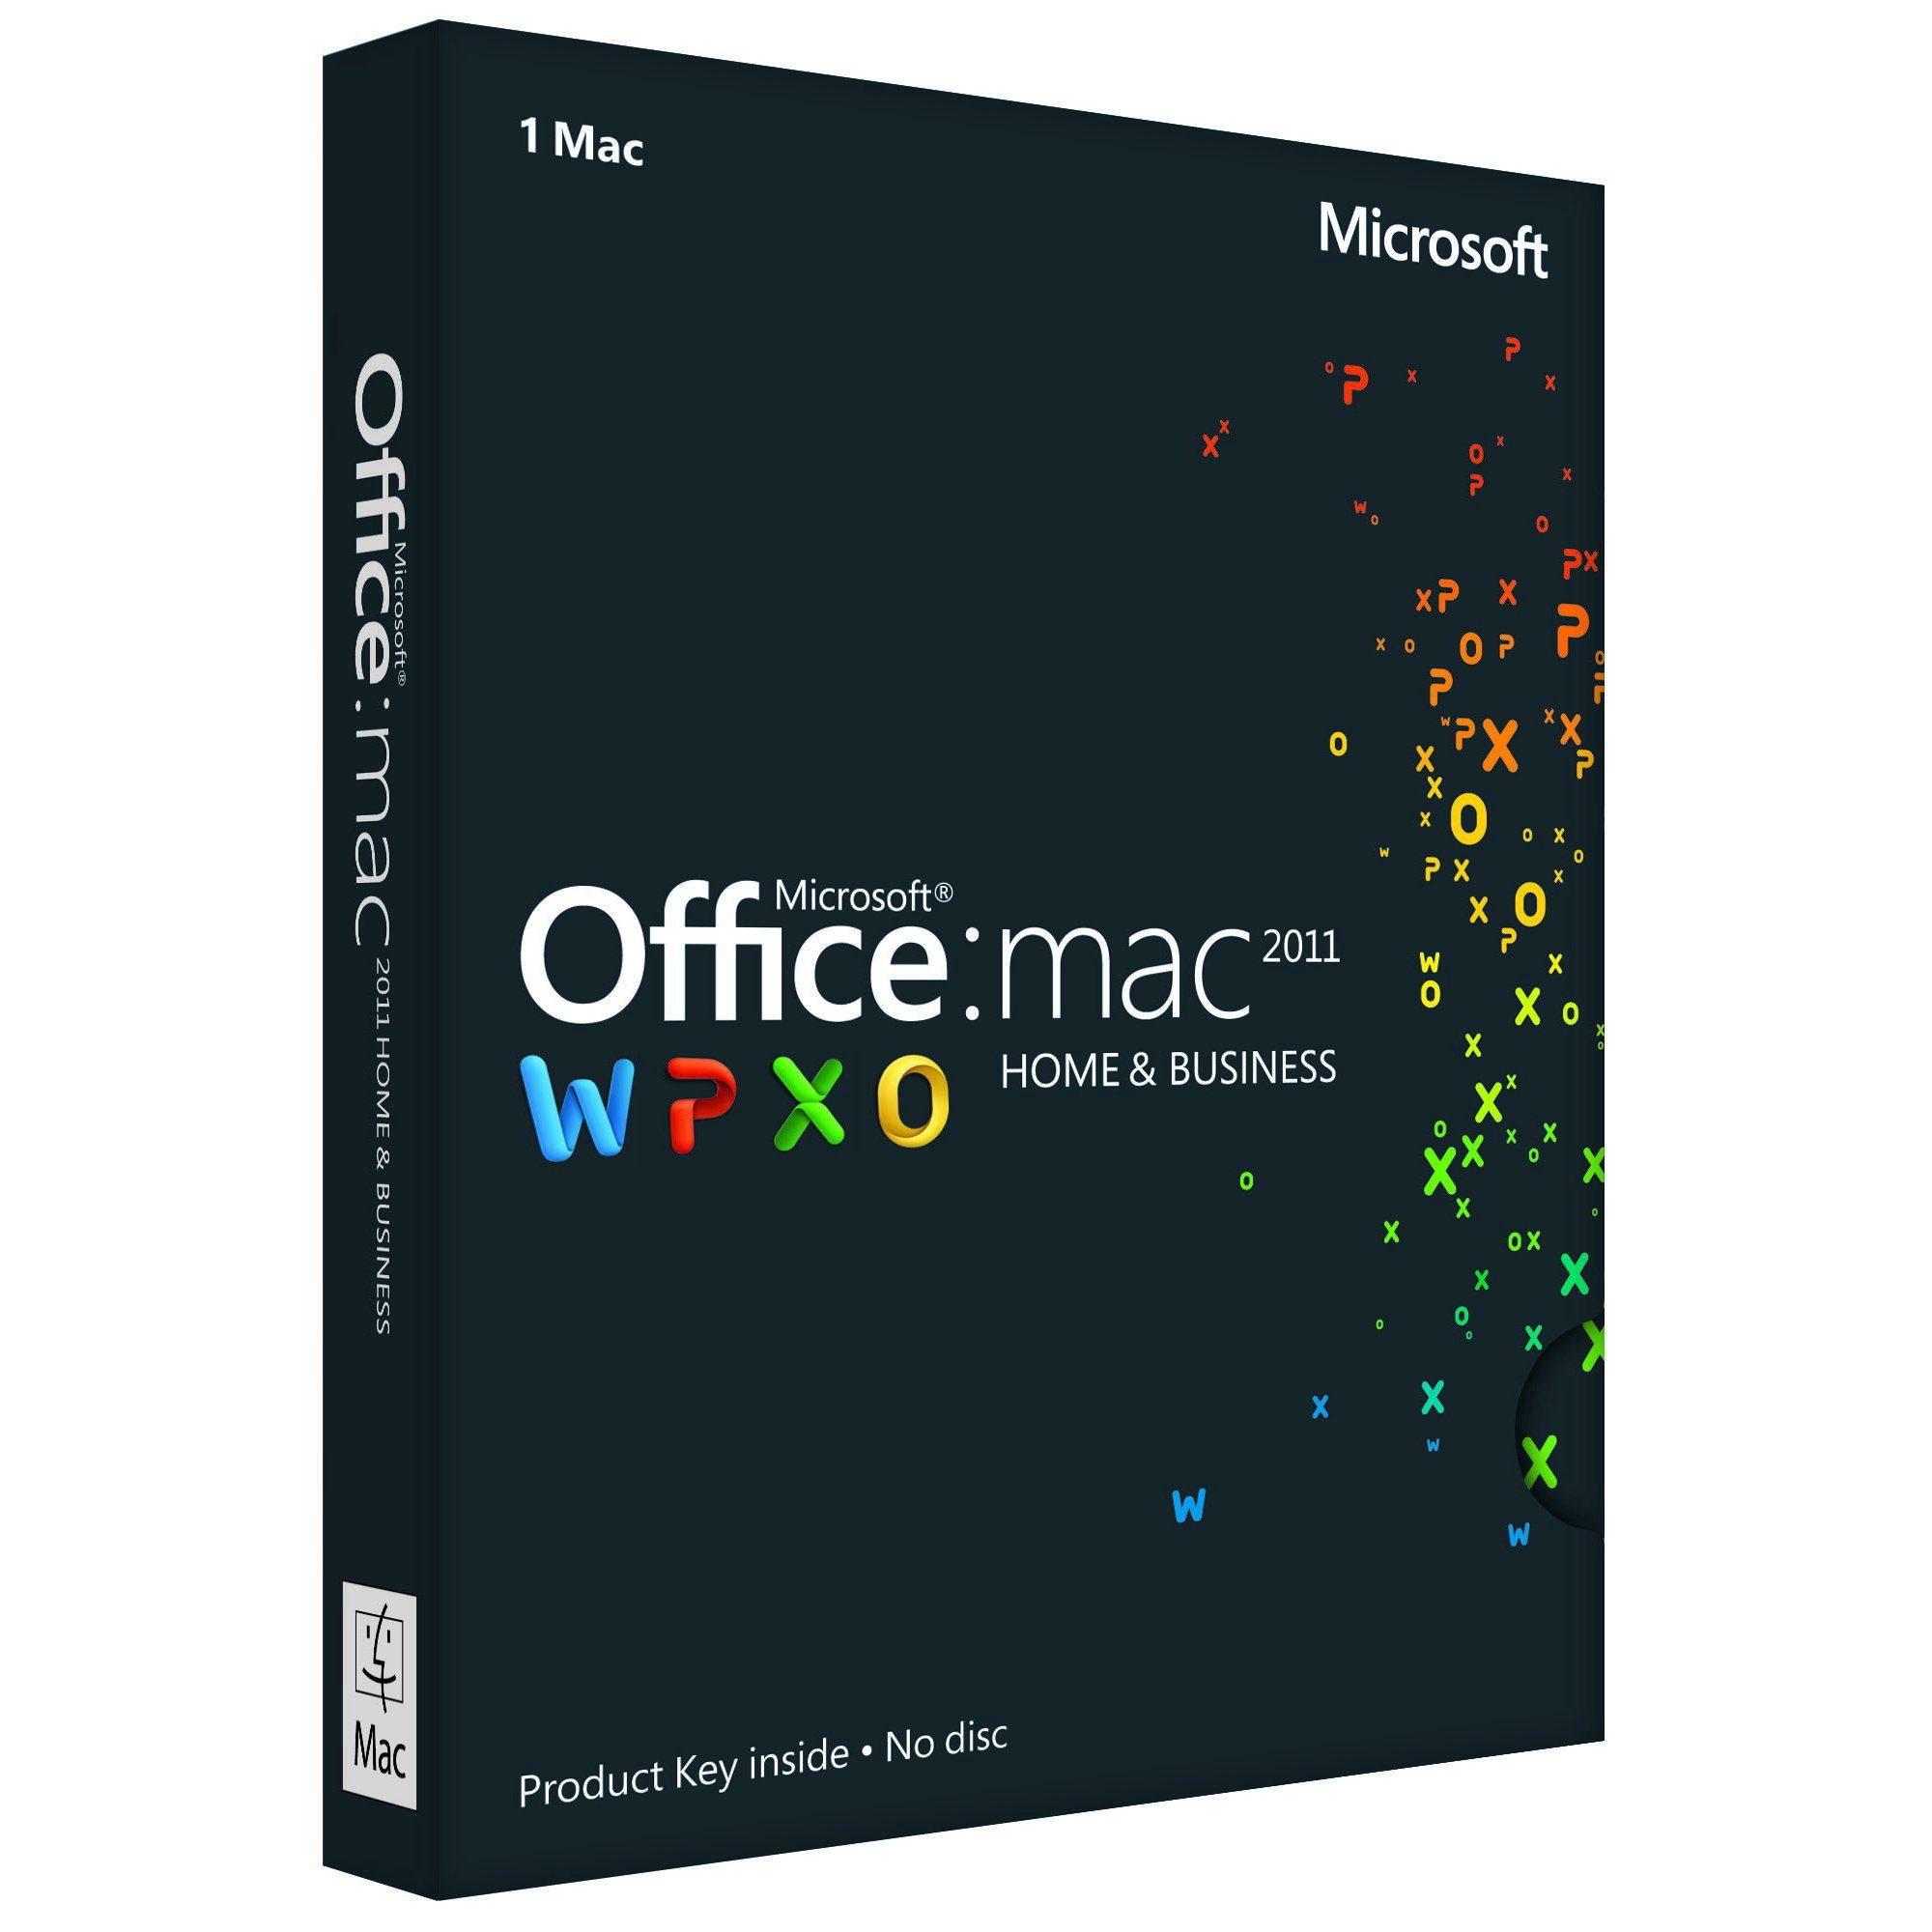 Microsoft Office 2011 Home & Business Product Key for Mac